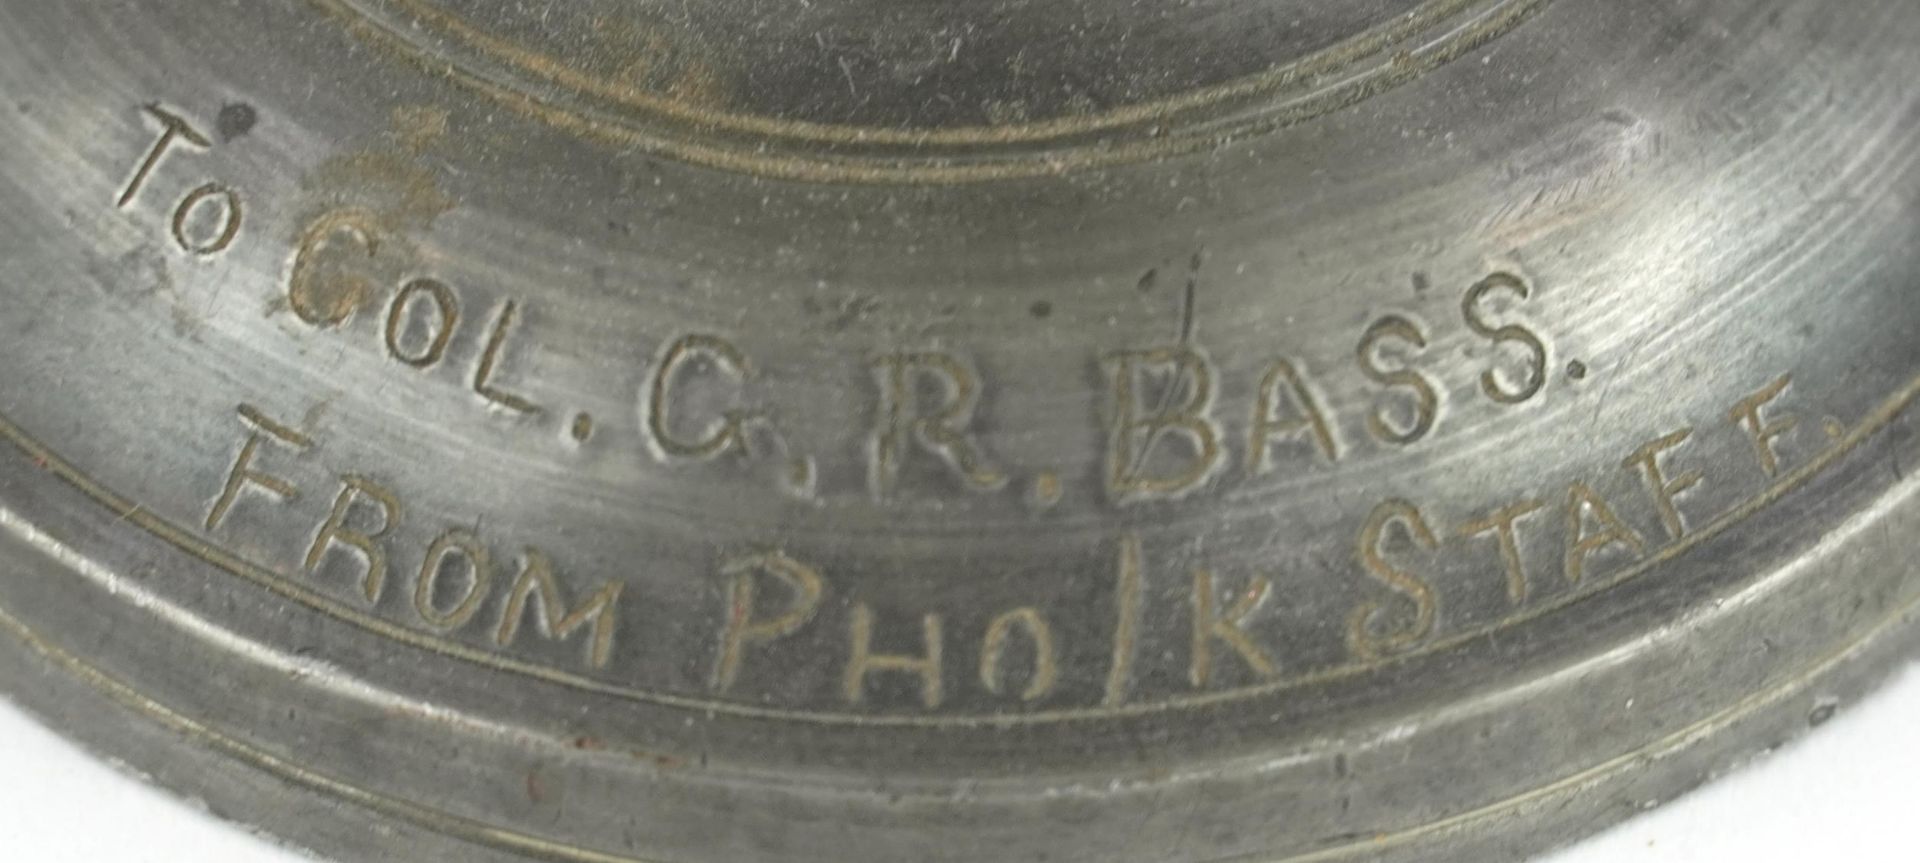 Military interest pewter globe inkwell to Colonel G R Bass from Pho/K staff incised with Chinese - Image 4 of 8